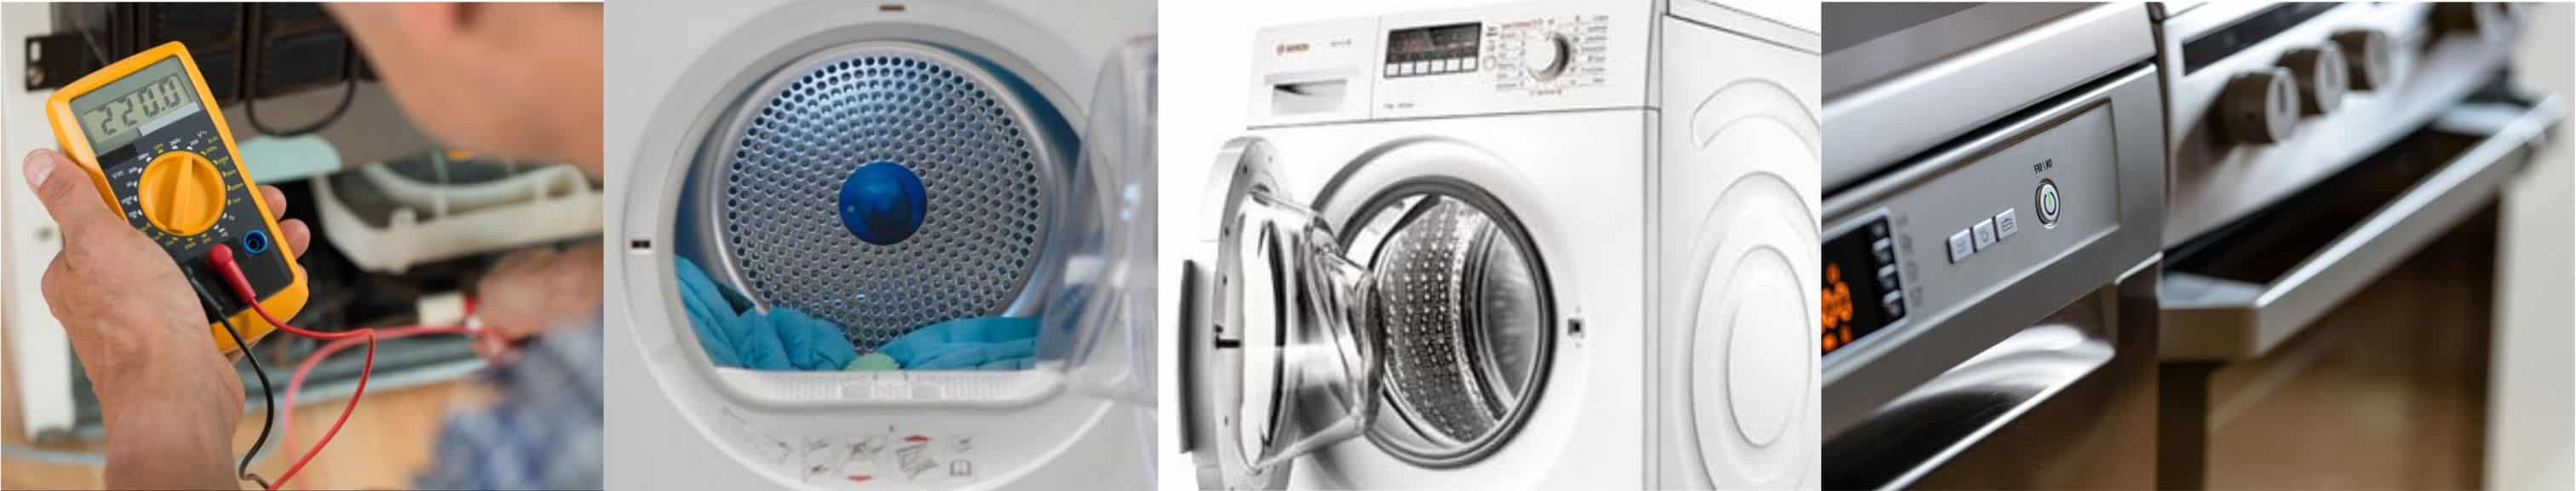 appliance repair in kildare washing machines, ovens, cookers, tumble dryers, electric showers